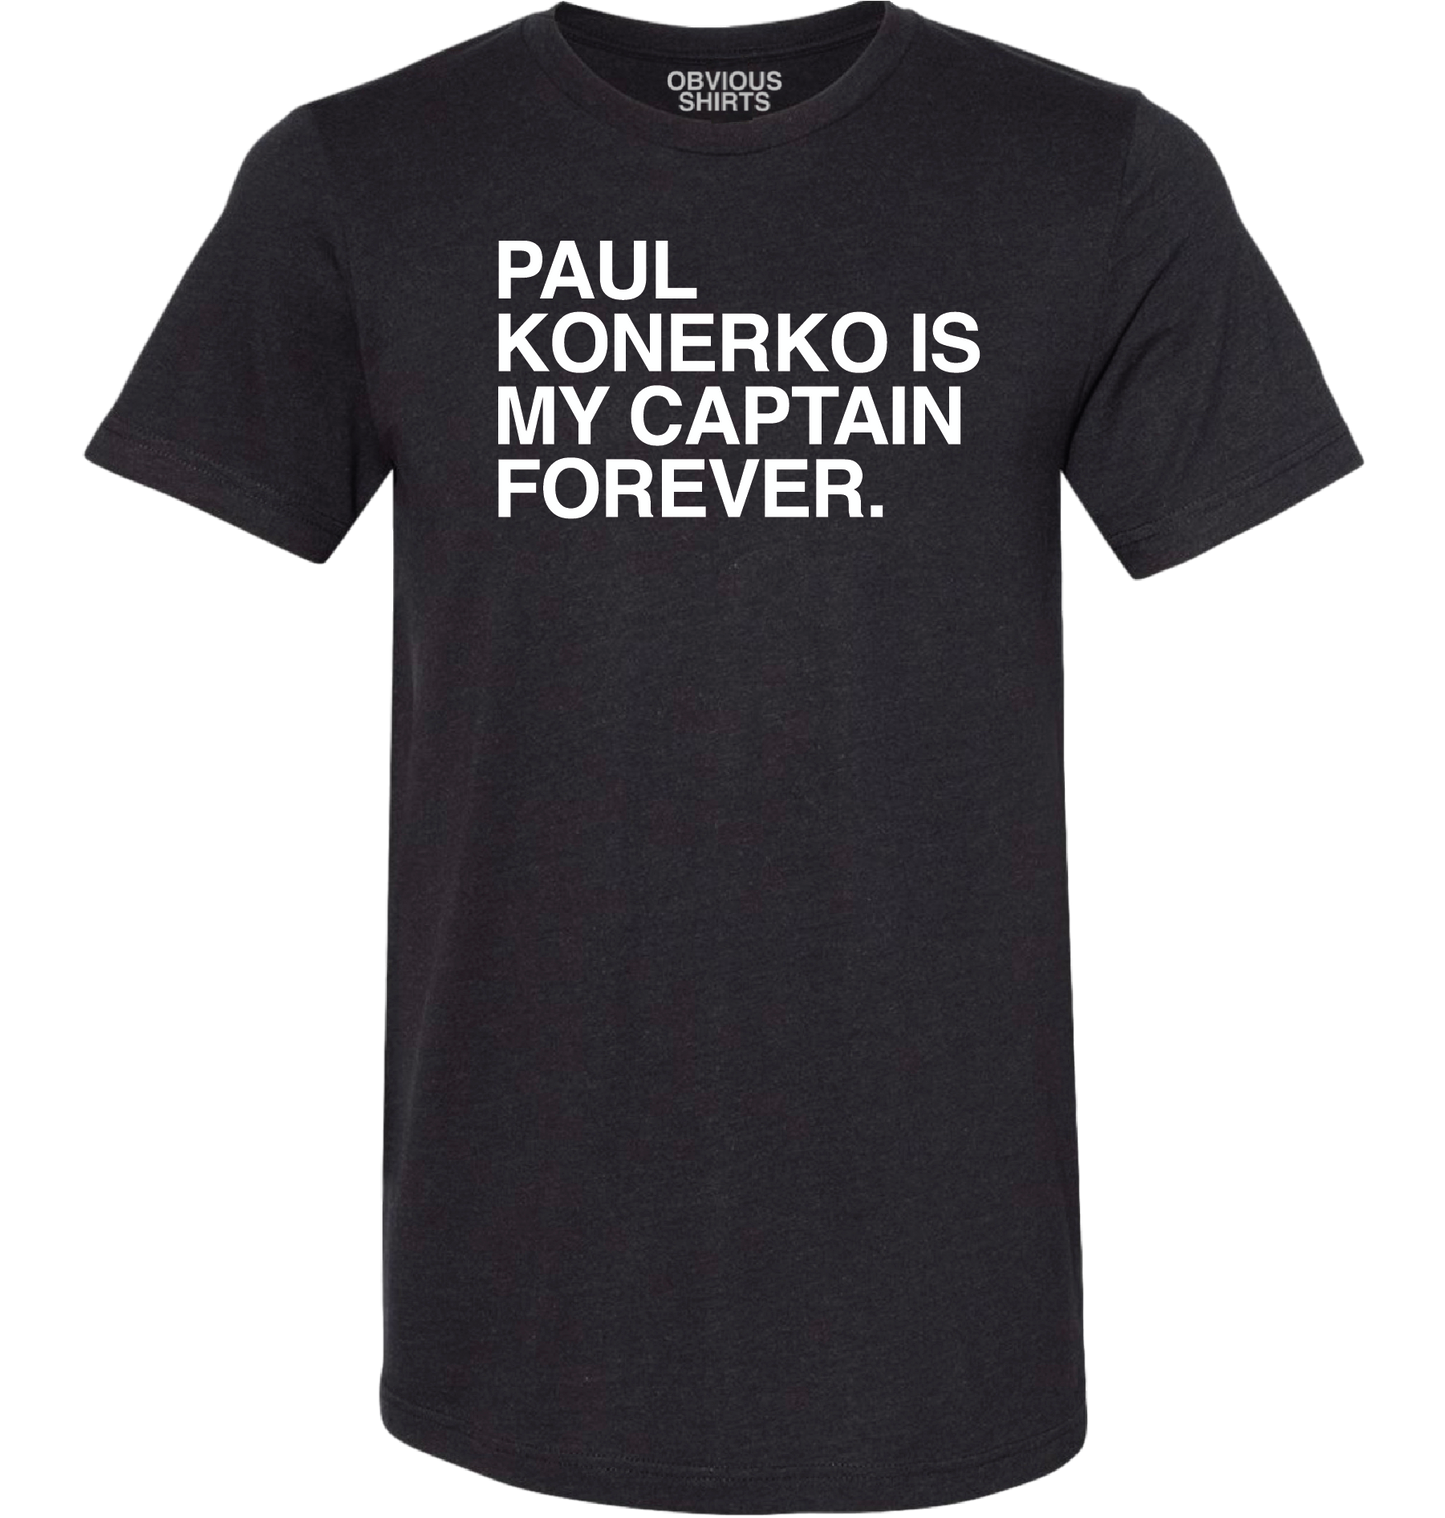 Men's Obvious Shirts Chicago White Sox "Paul Konerko Is My Captain Forever." Tee